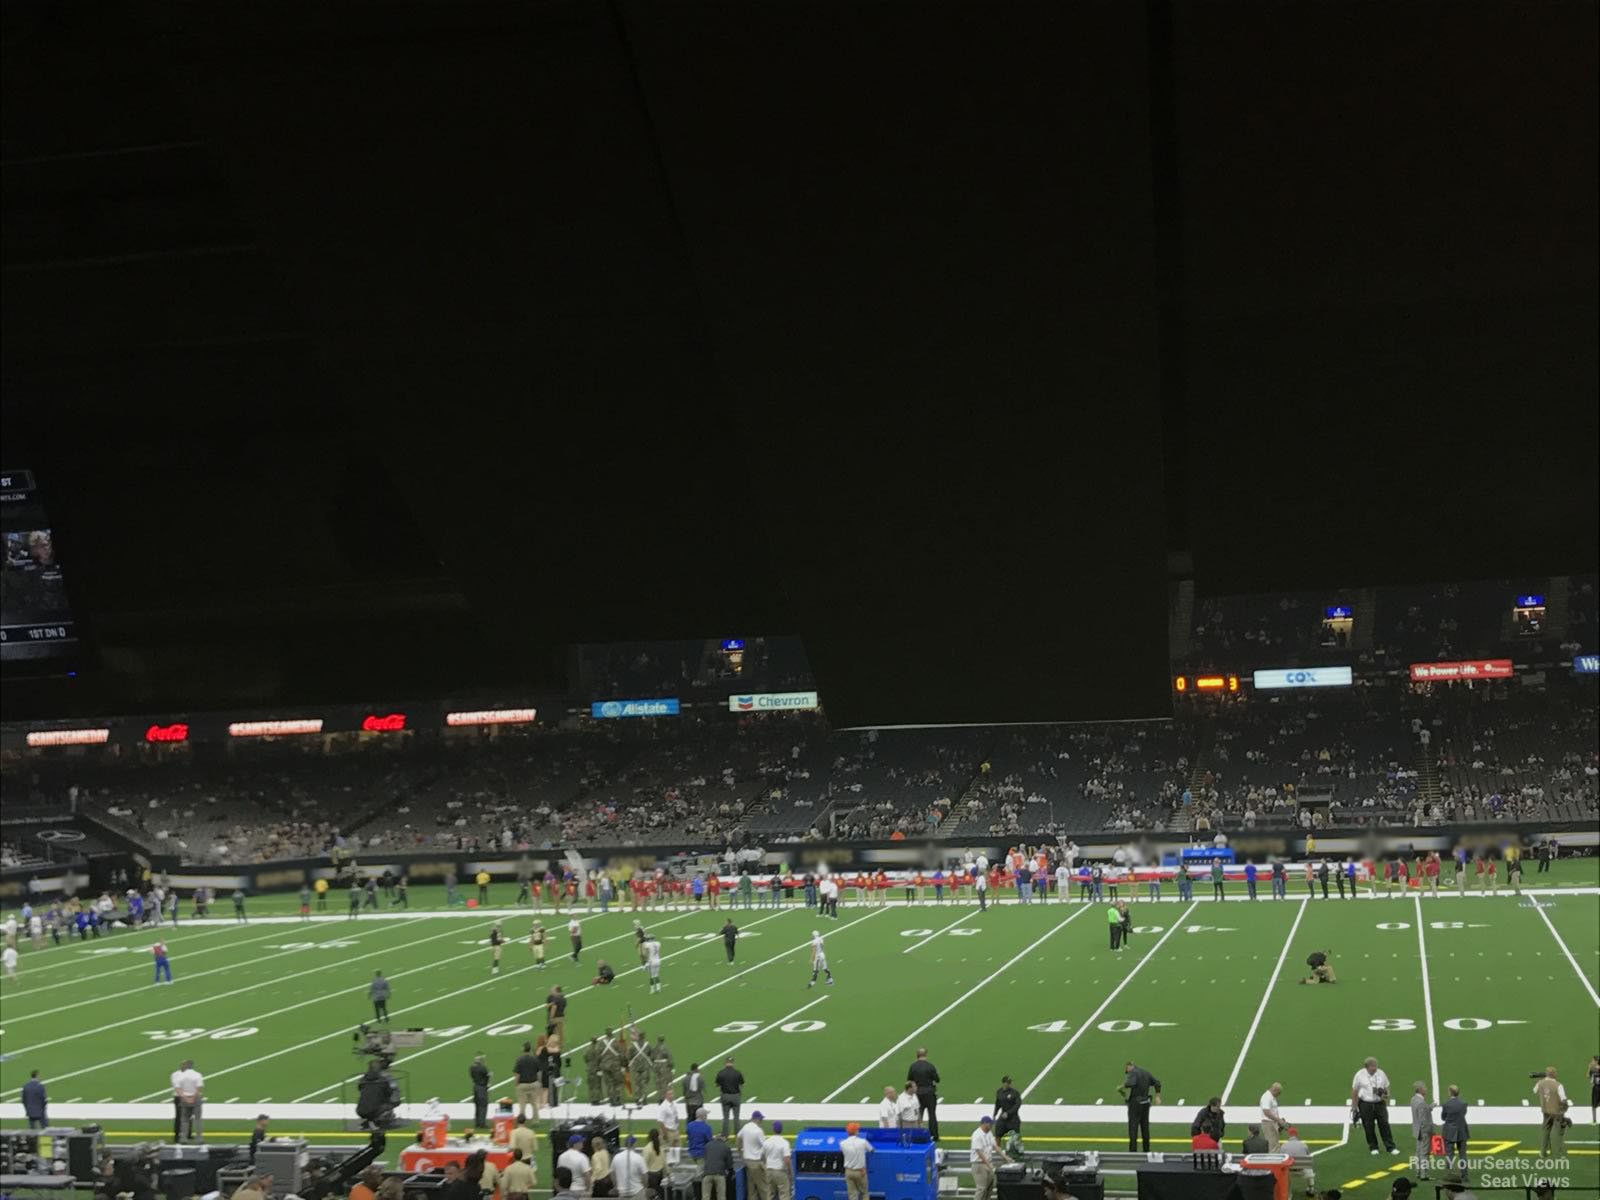 Superdome Section 140 Row 13 on 8 31 2017_FL